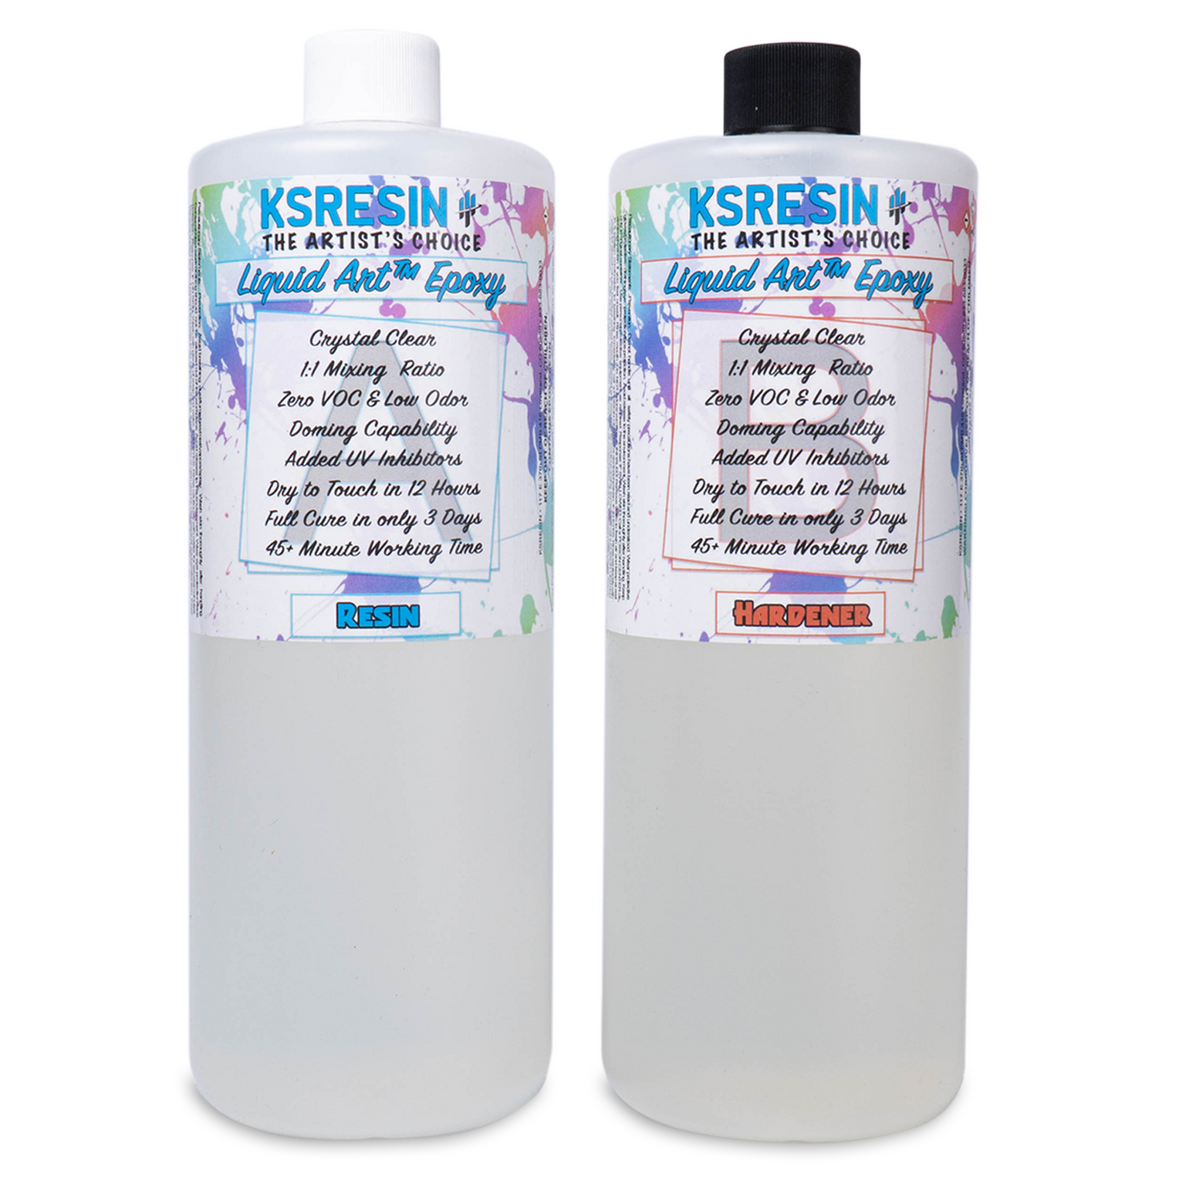 Crystal Clear Epoxy Resin Kit, Crystal Clear Resin Epoxy - Coloredepoxies